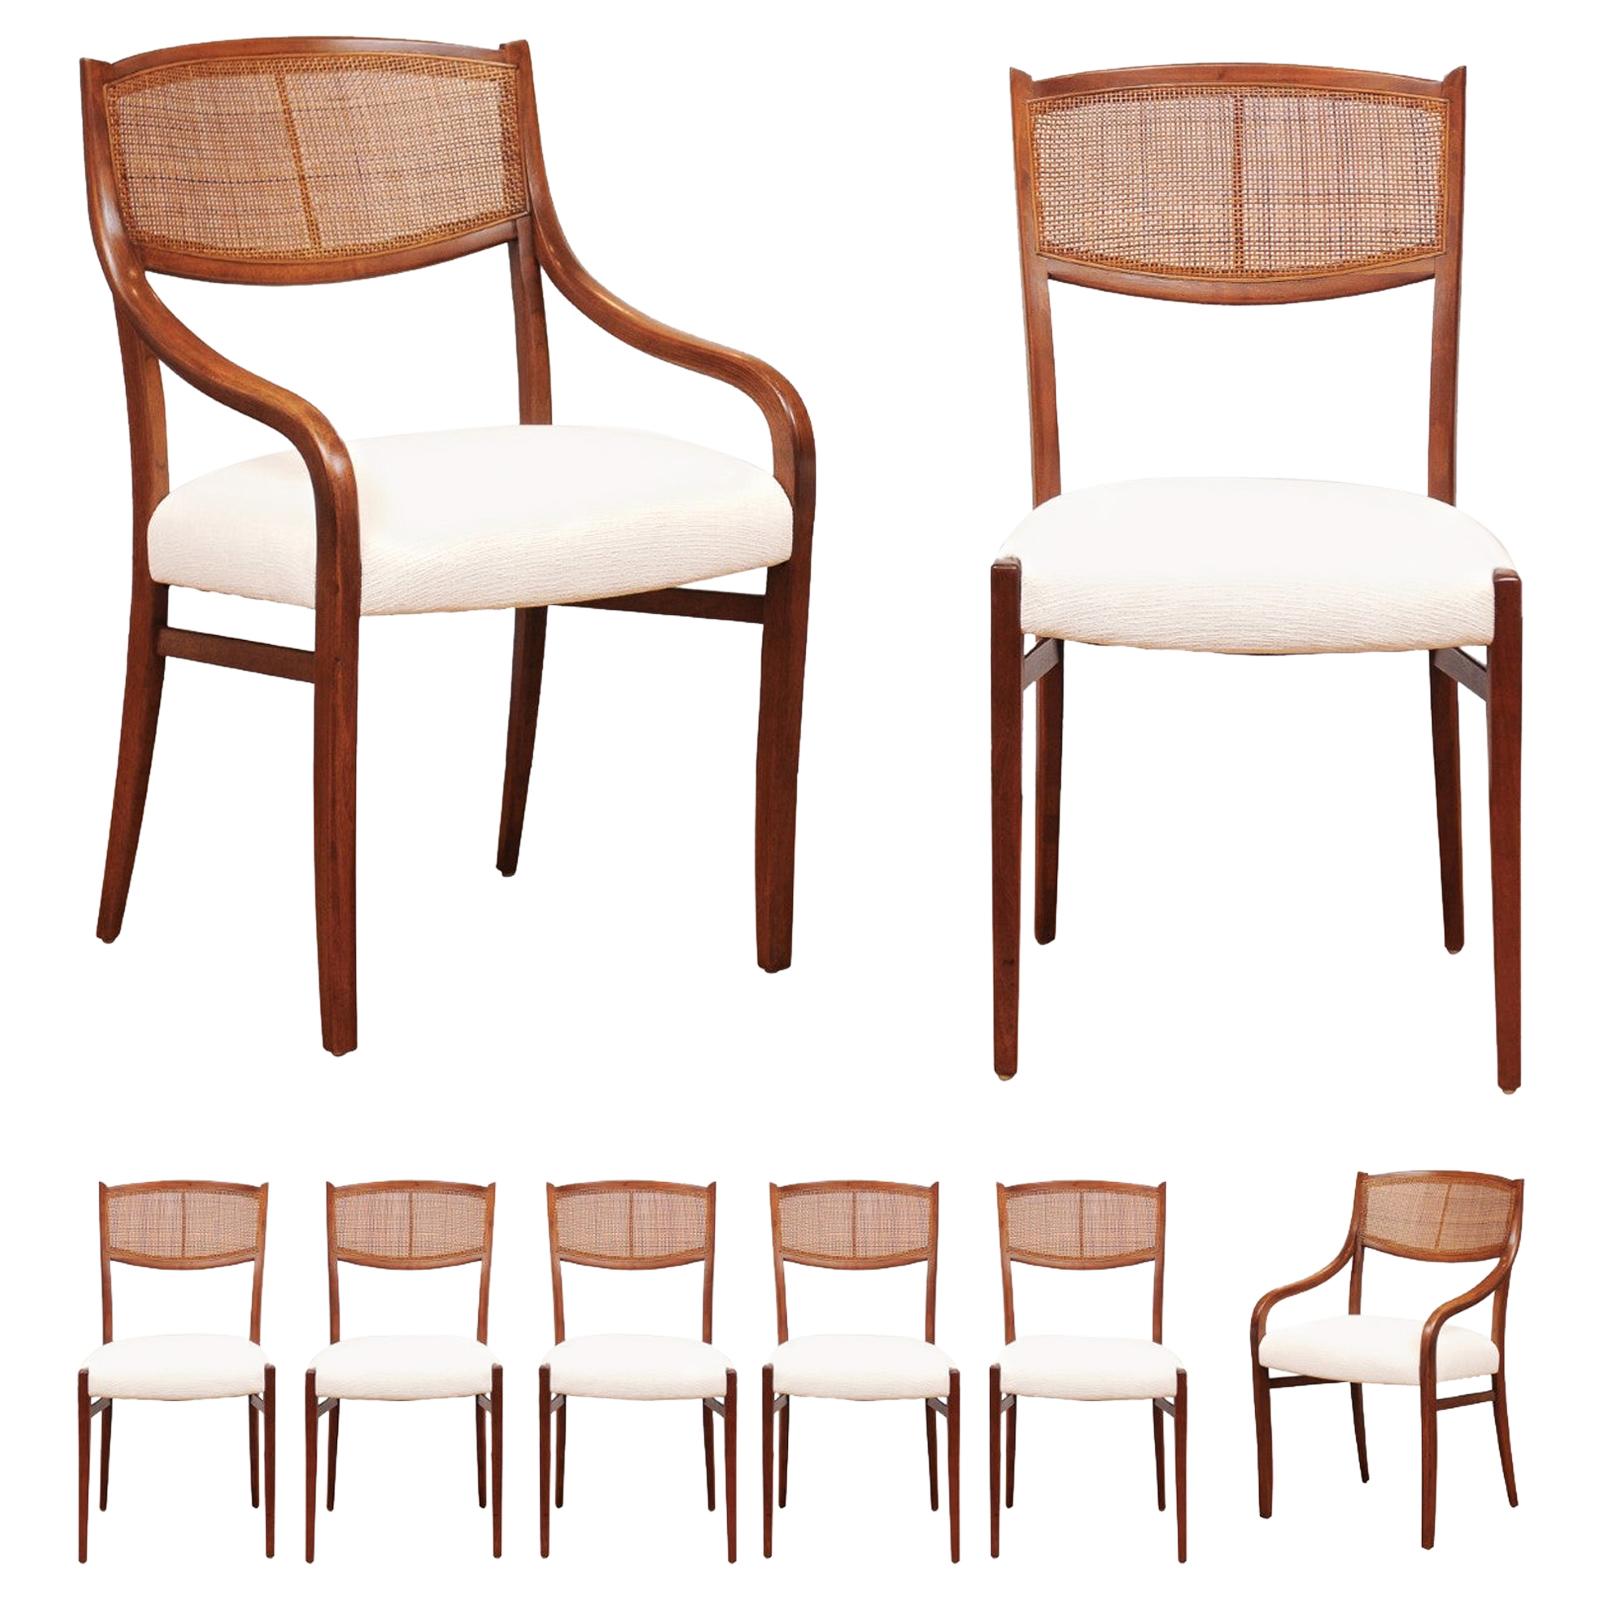 Incredible Set of 8 Walnut Cane Dining Chairs by Barney Flagg, circa 1960 For Sale